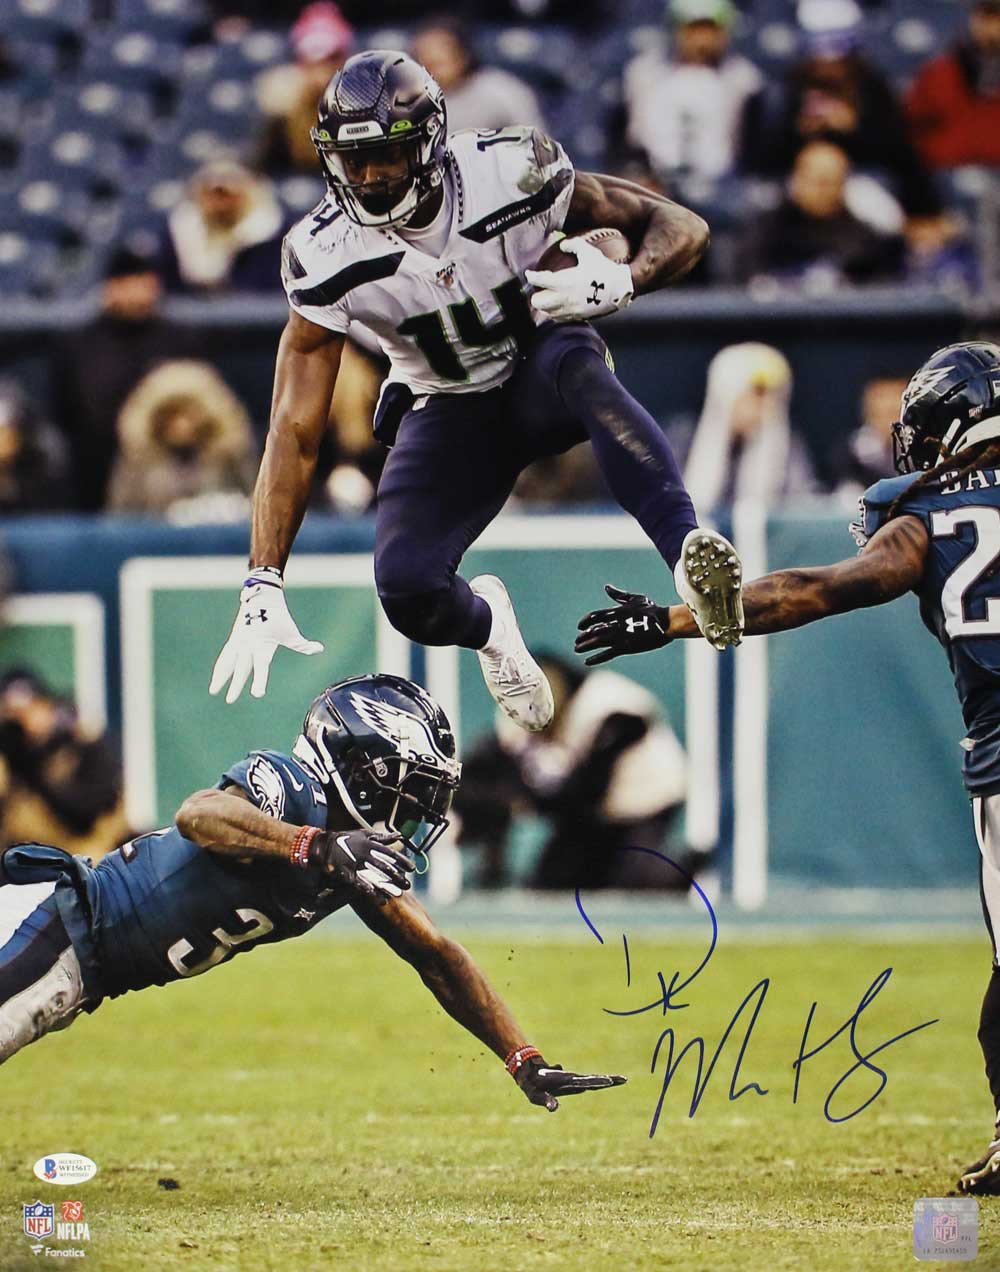 DK Metcalf Autographed/Signed Seattle Seahawks 16x20 Photo BAS 31642